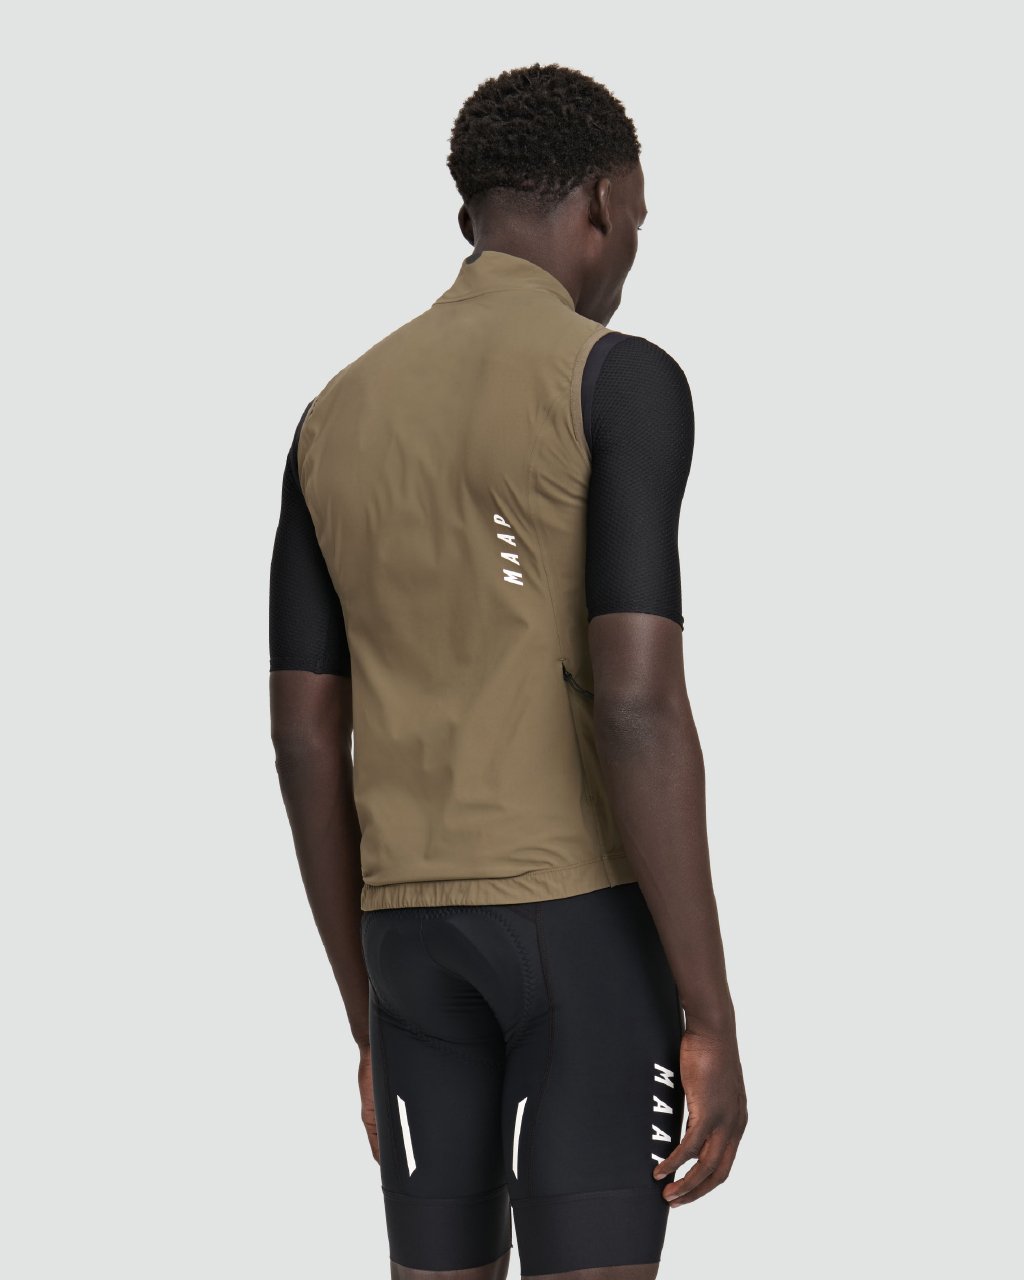 Prime Vest - MAAP Cycling Apparel